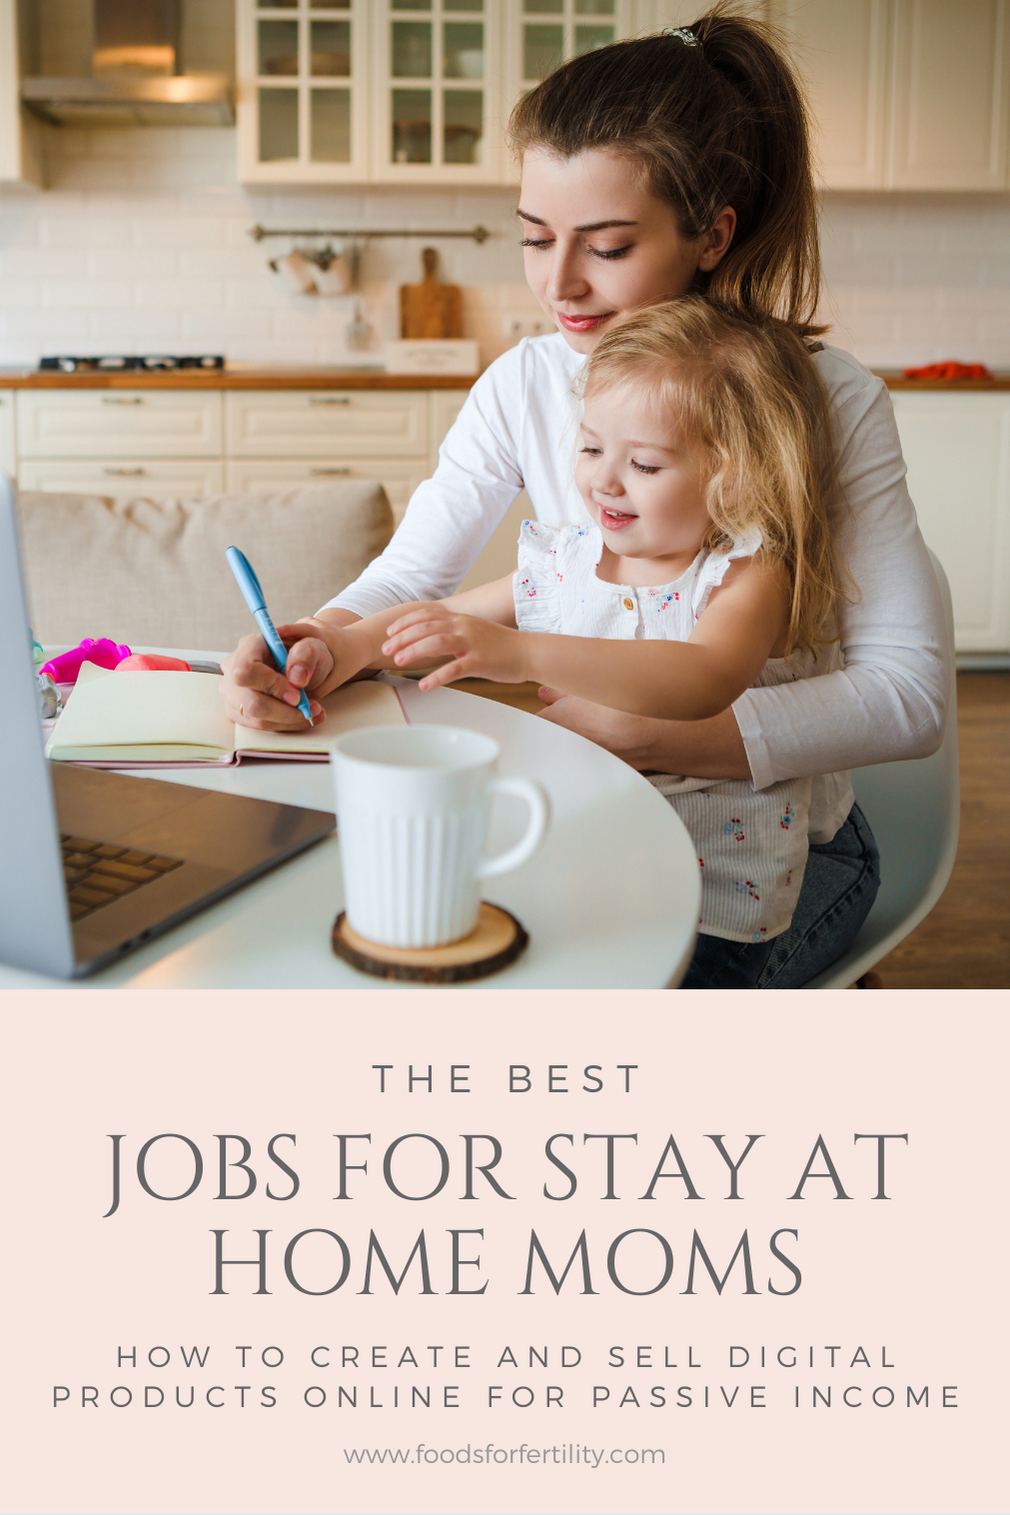 The Best Jobs for Stay at Home Moms